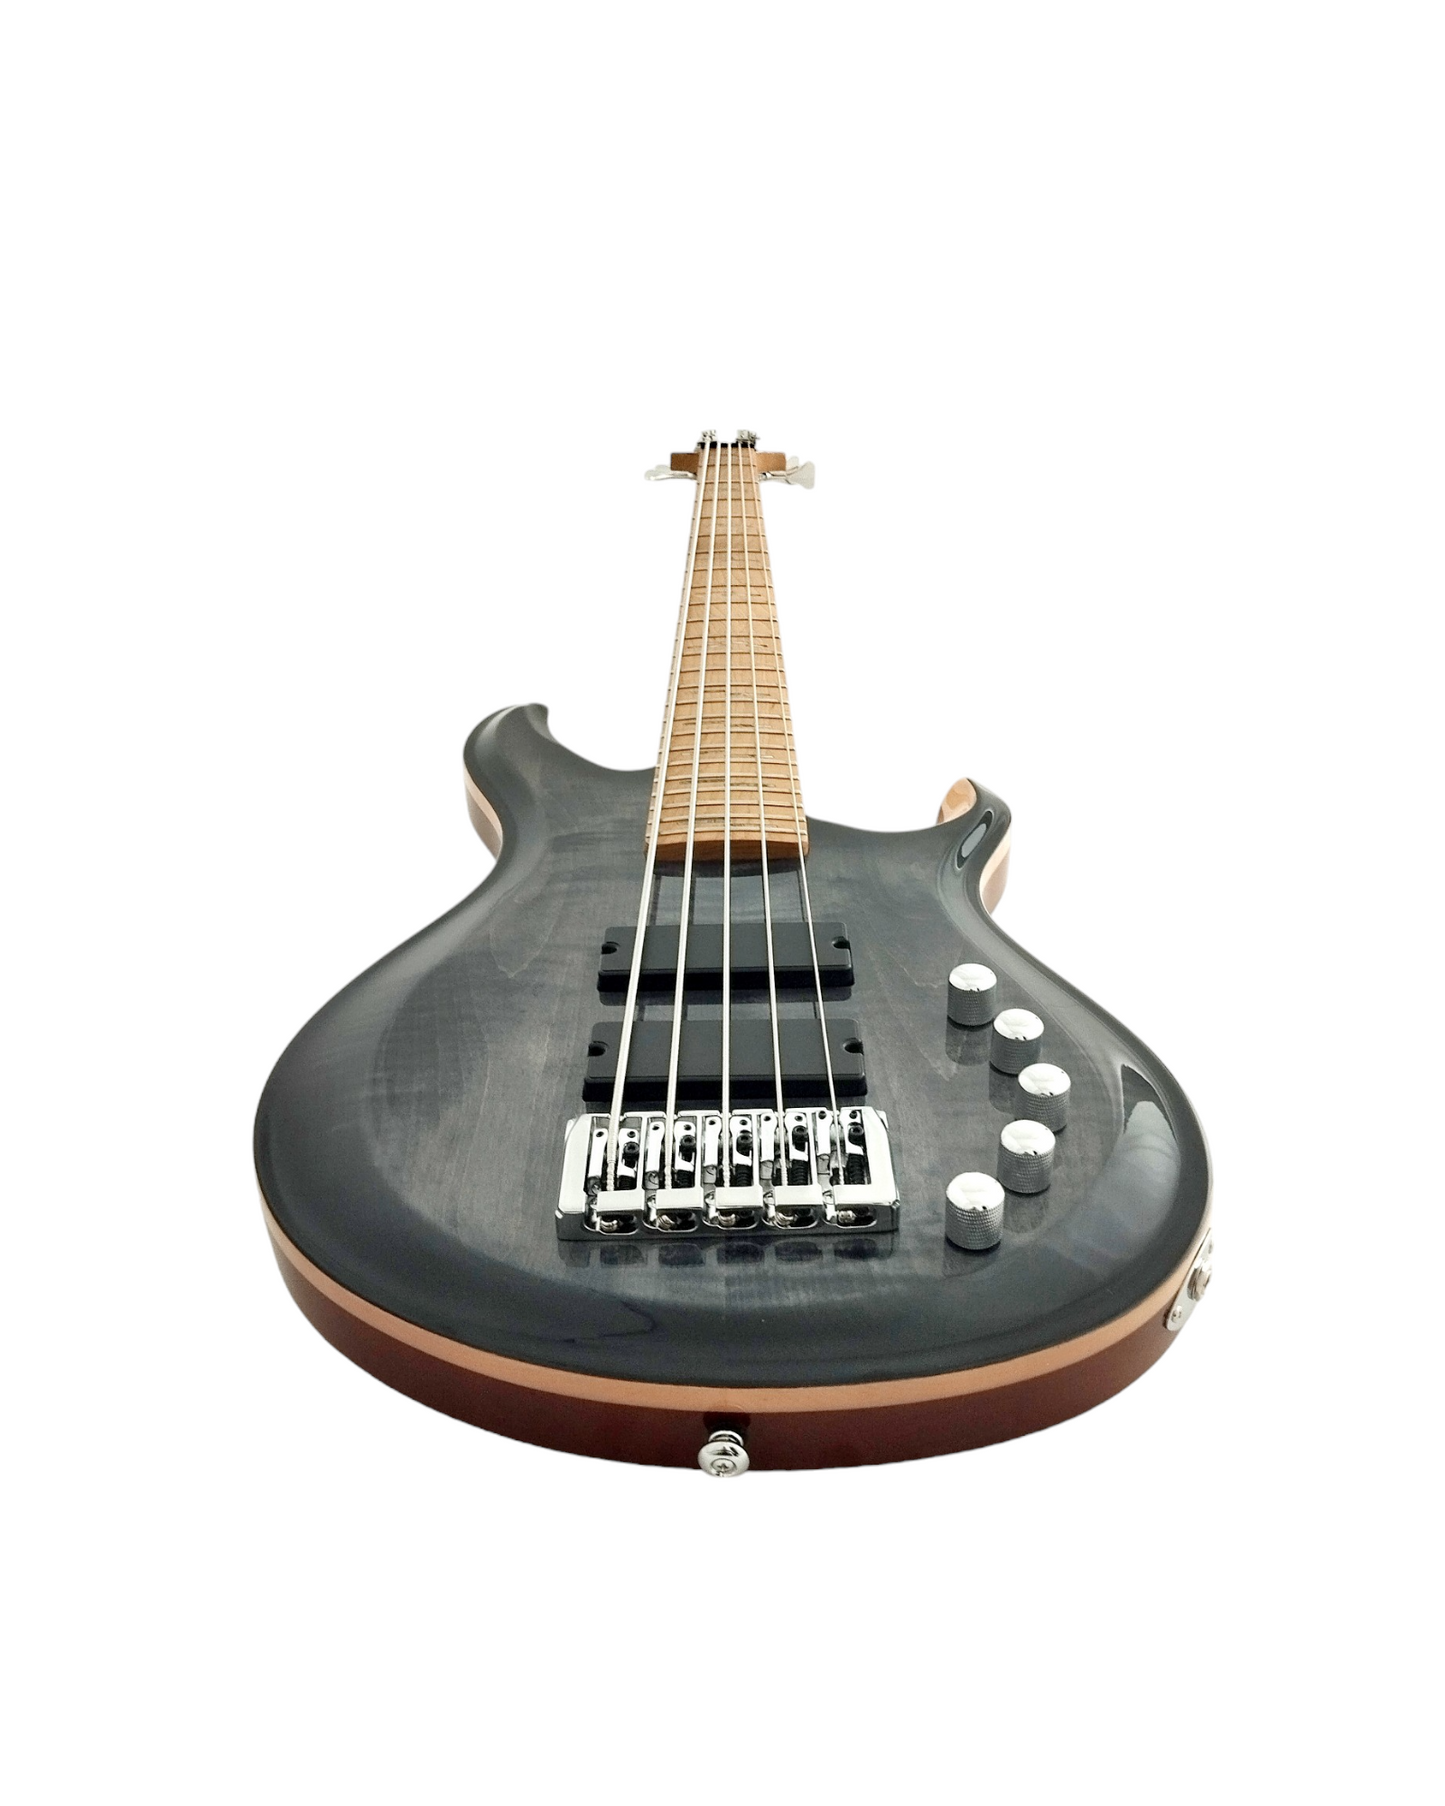 An Exquisite 5th String Bass Guitar with Superior Sound Quality BASS5